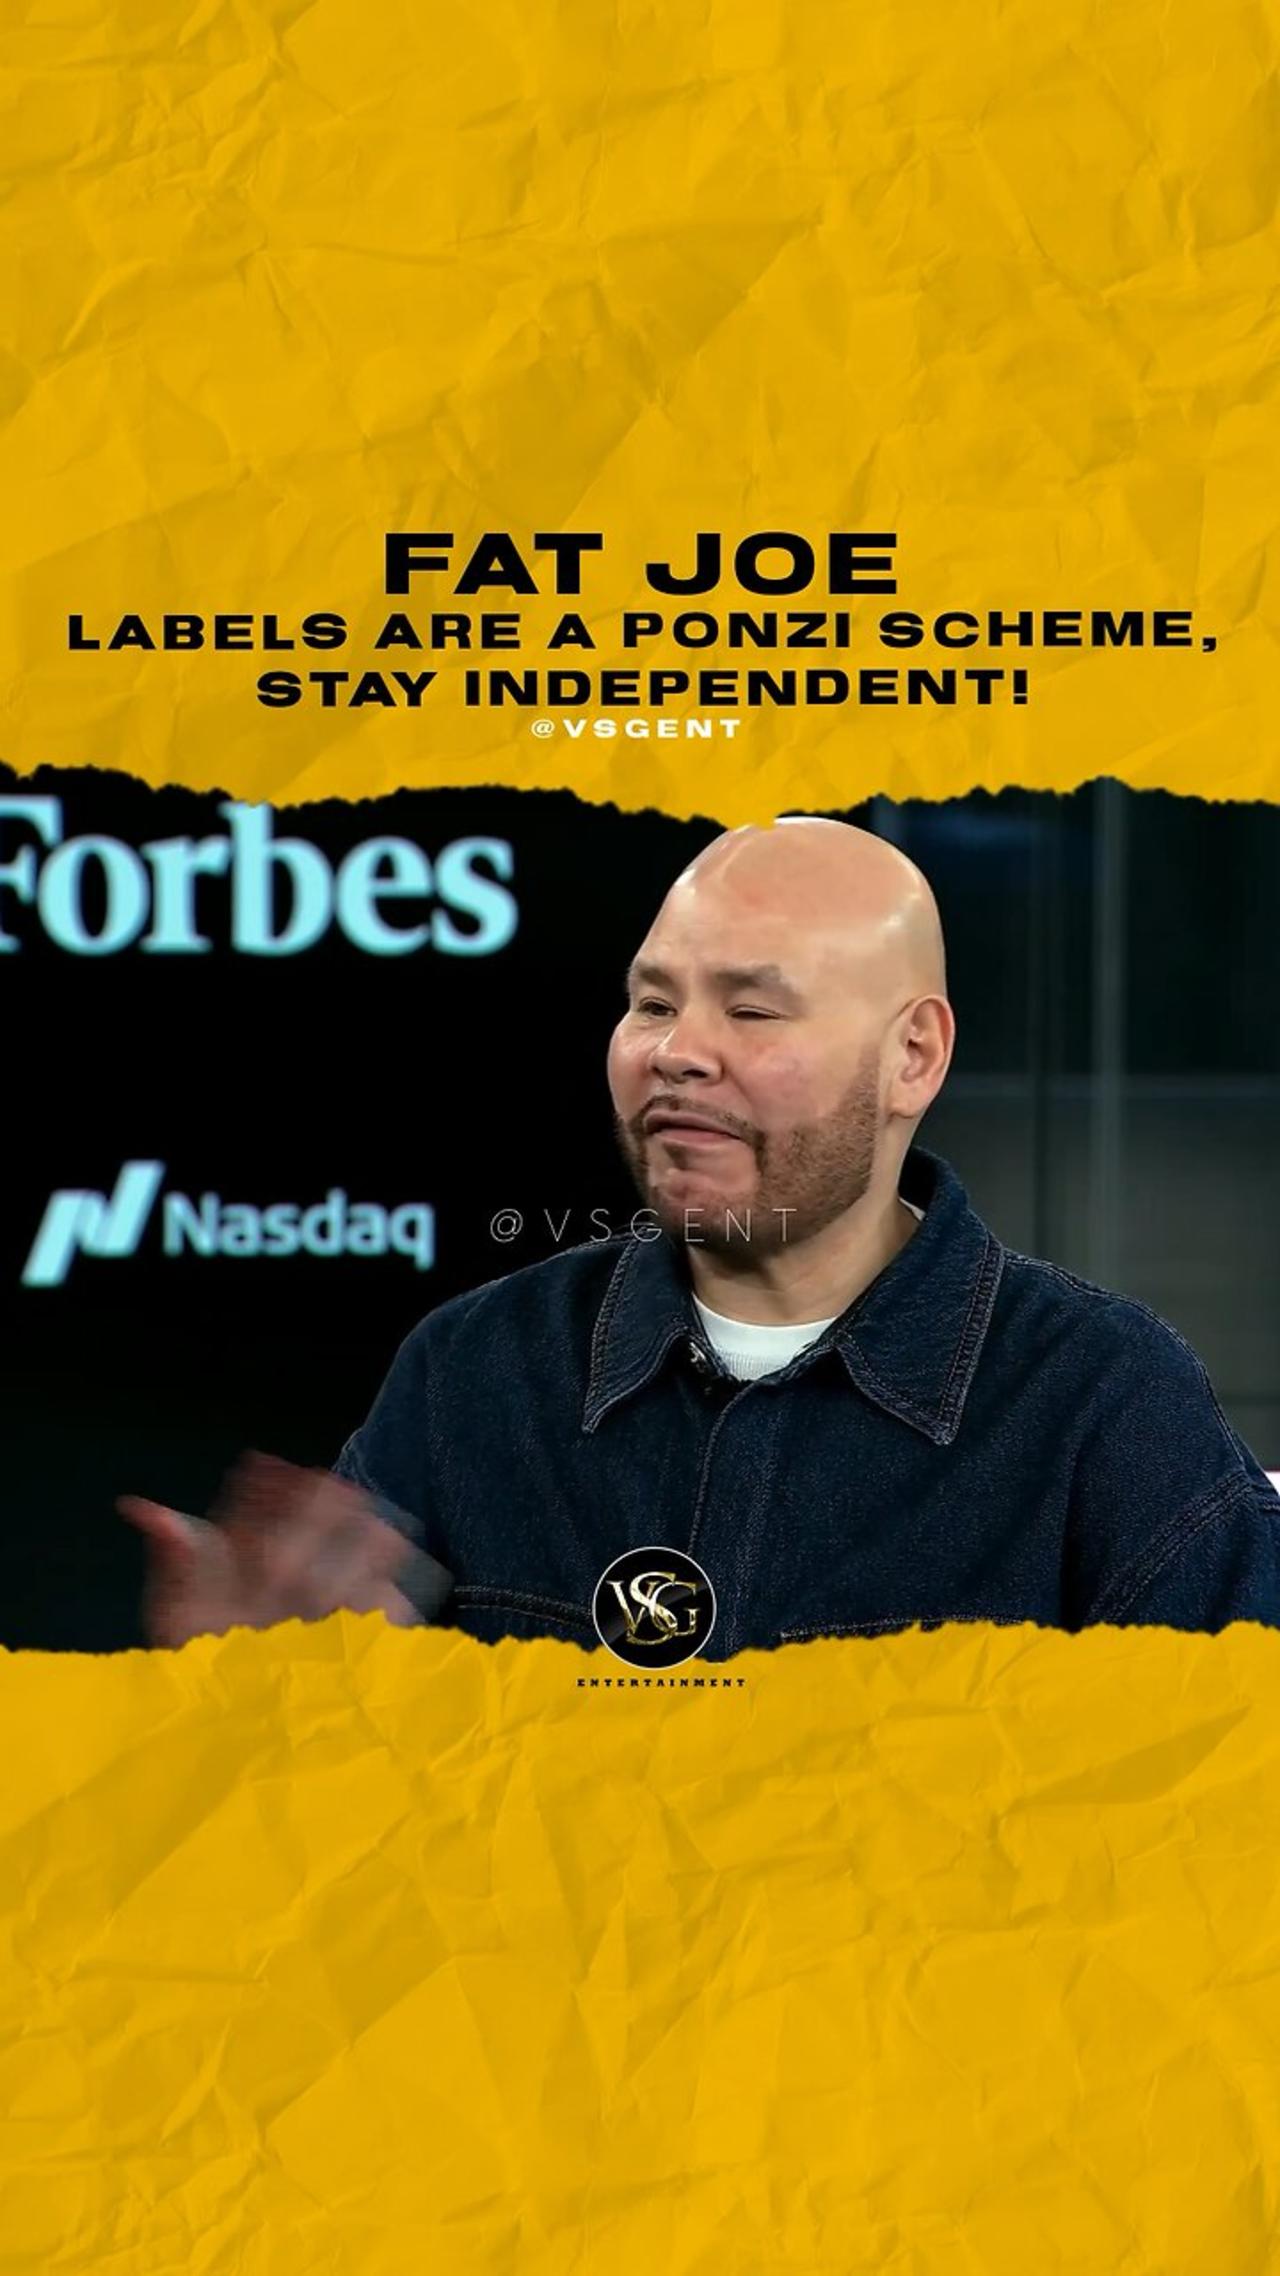 Labels are a Ponzi scheme, stay independent